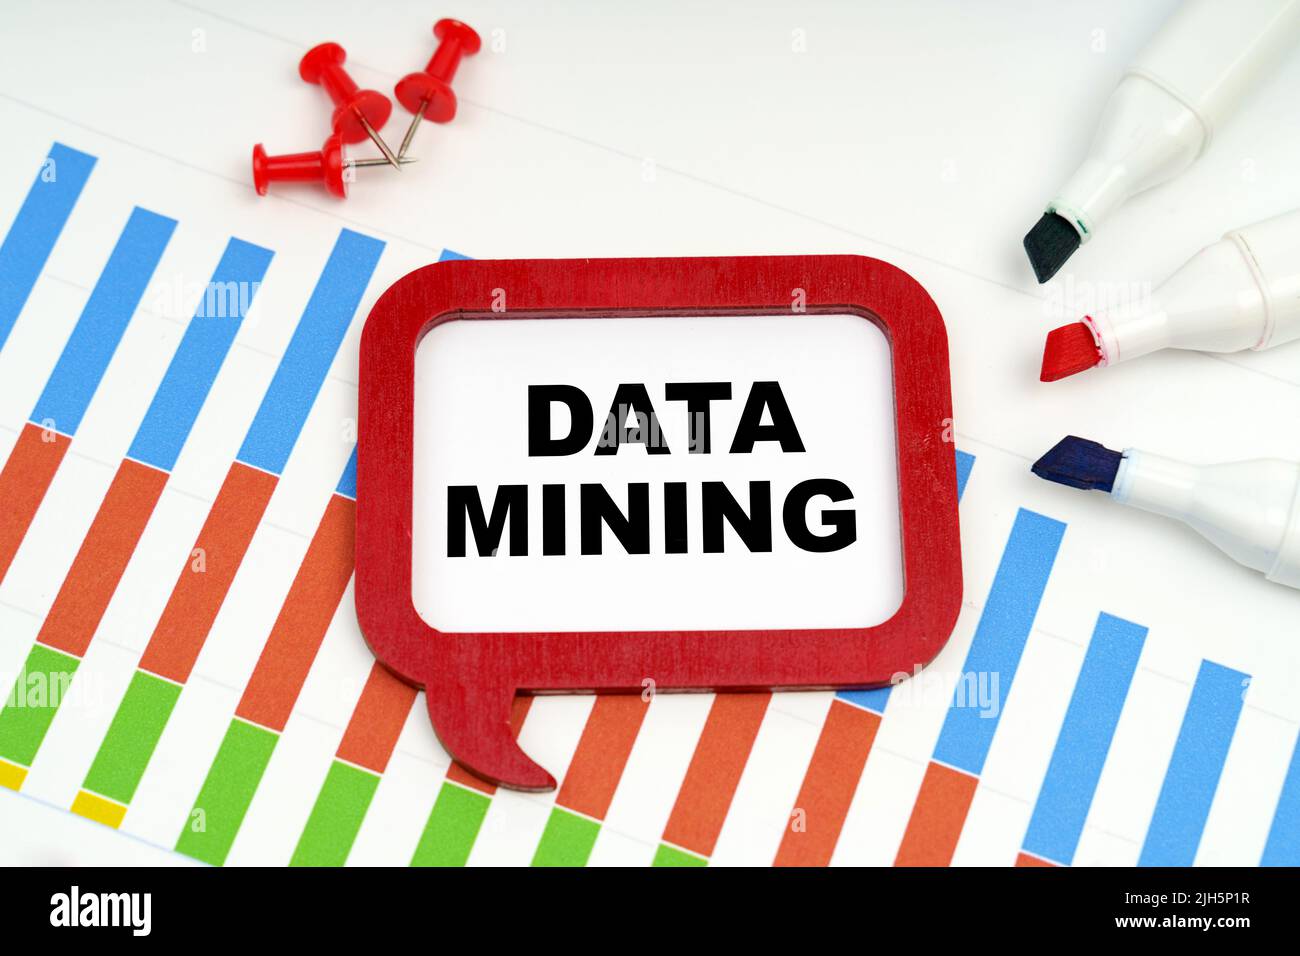 Business and economy concept. There are markers, charts and a sign on the table - DATA MINING Stock Photo